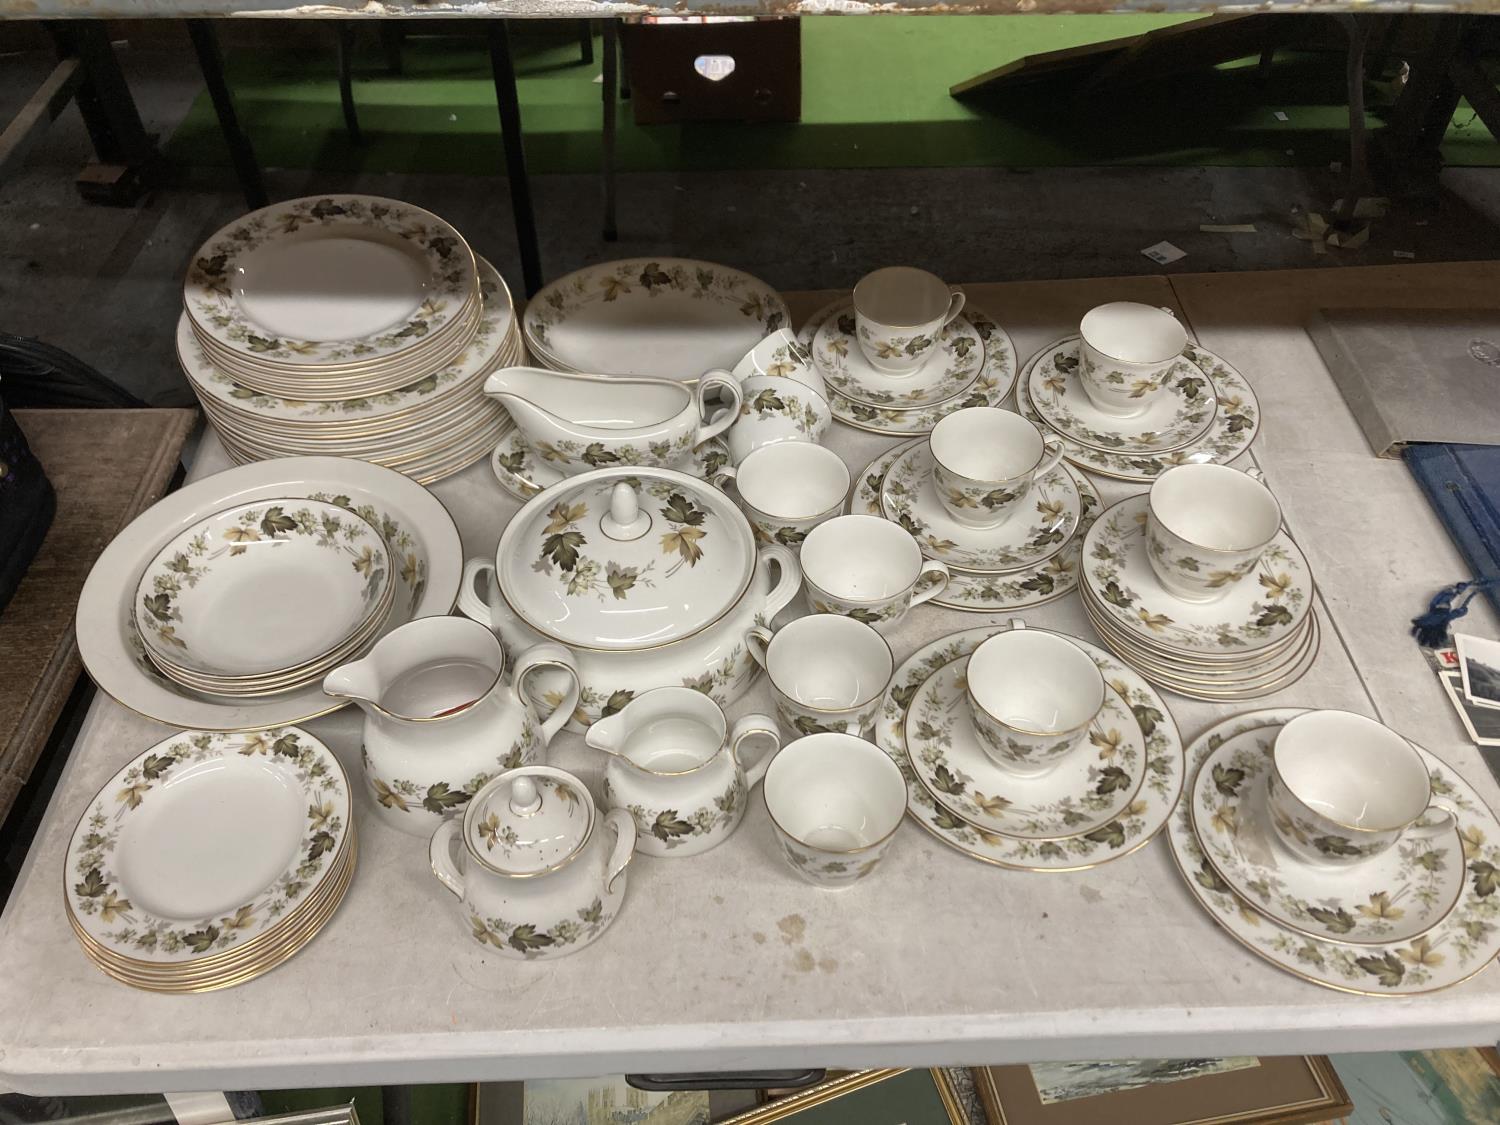 A ROYAL DOULTON 'LARCHMONT' DINNER SERVICE, TO INCLUDE VARIOUS SIZES OF PLATES, A SERVING TUREEN AND